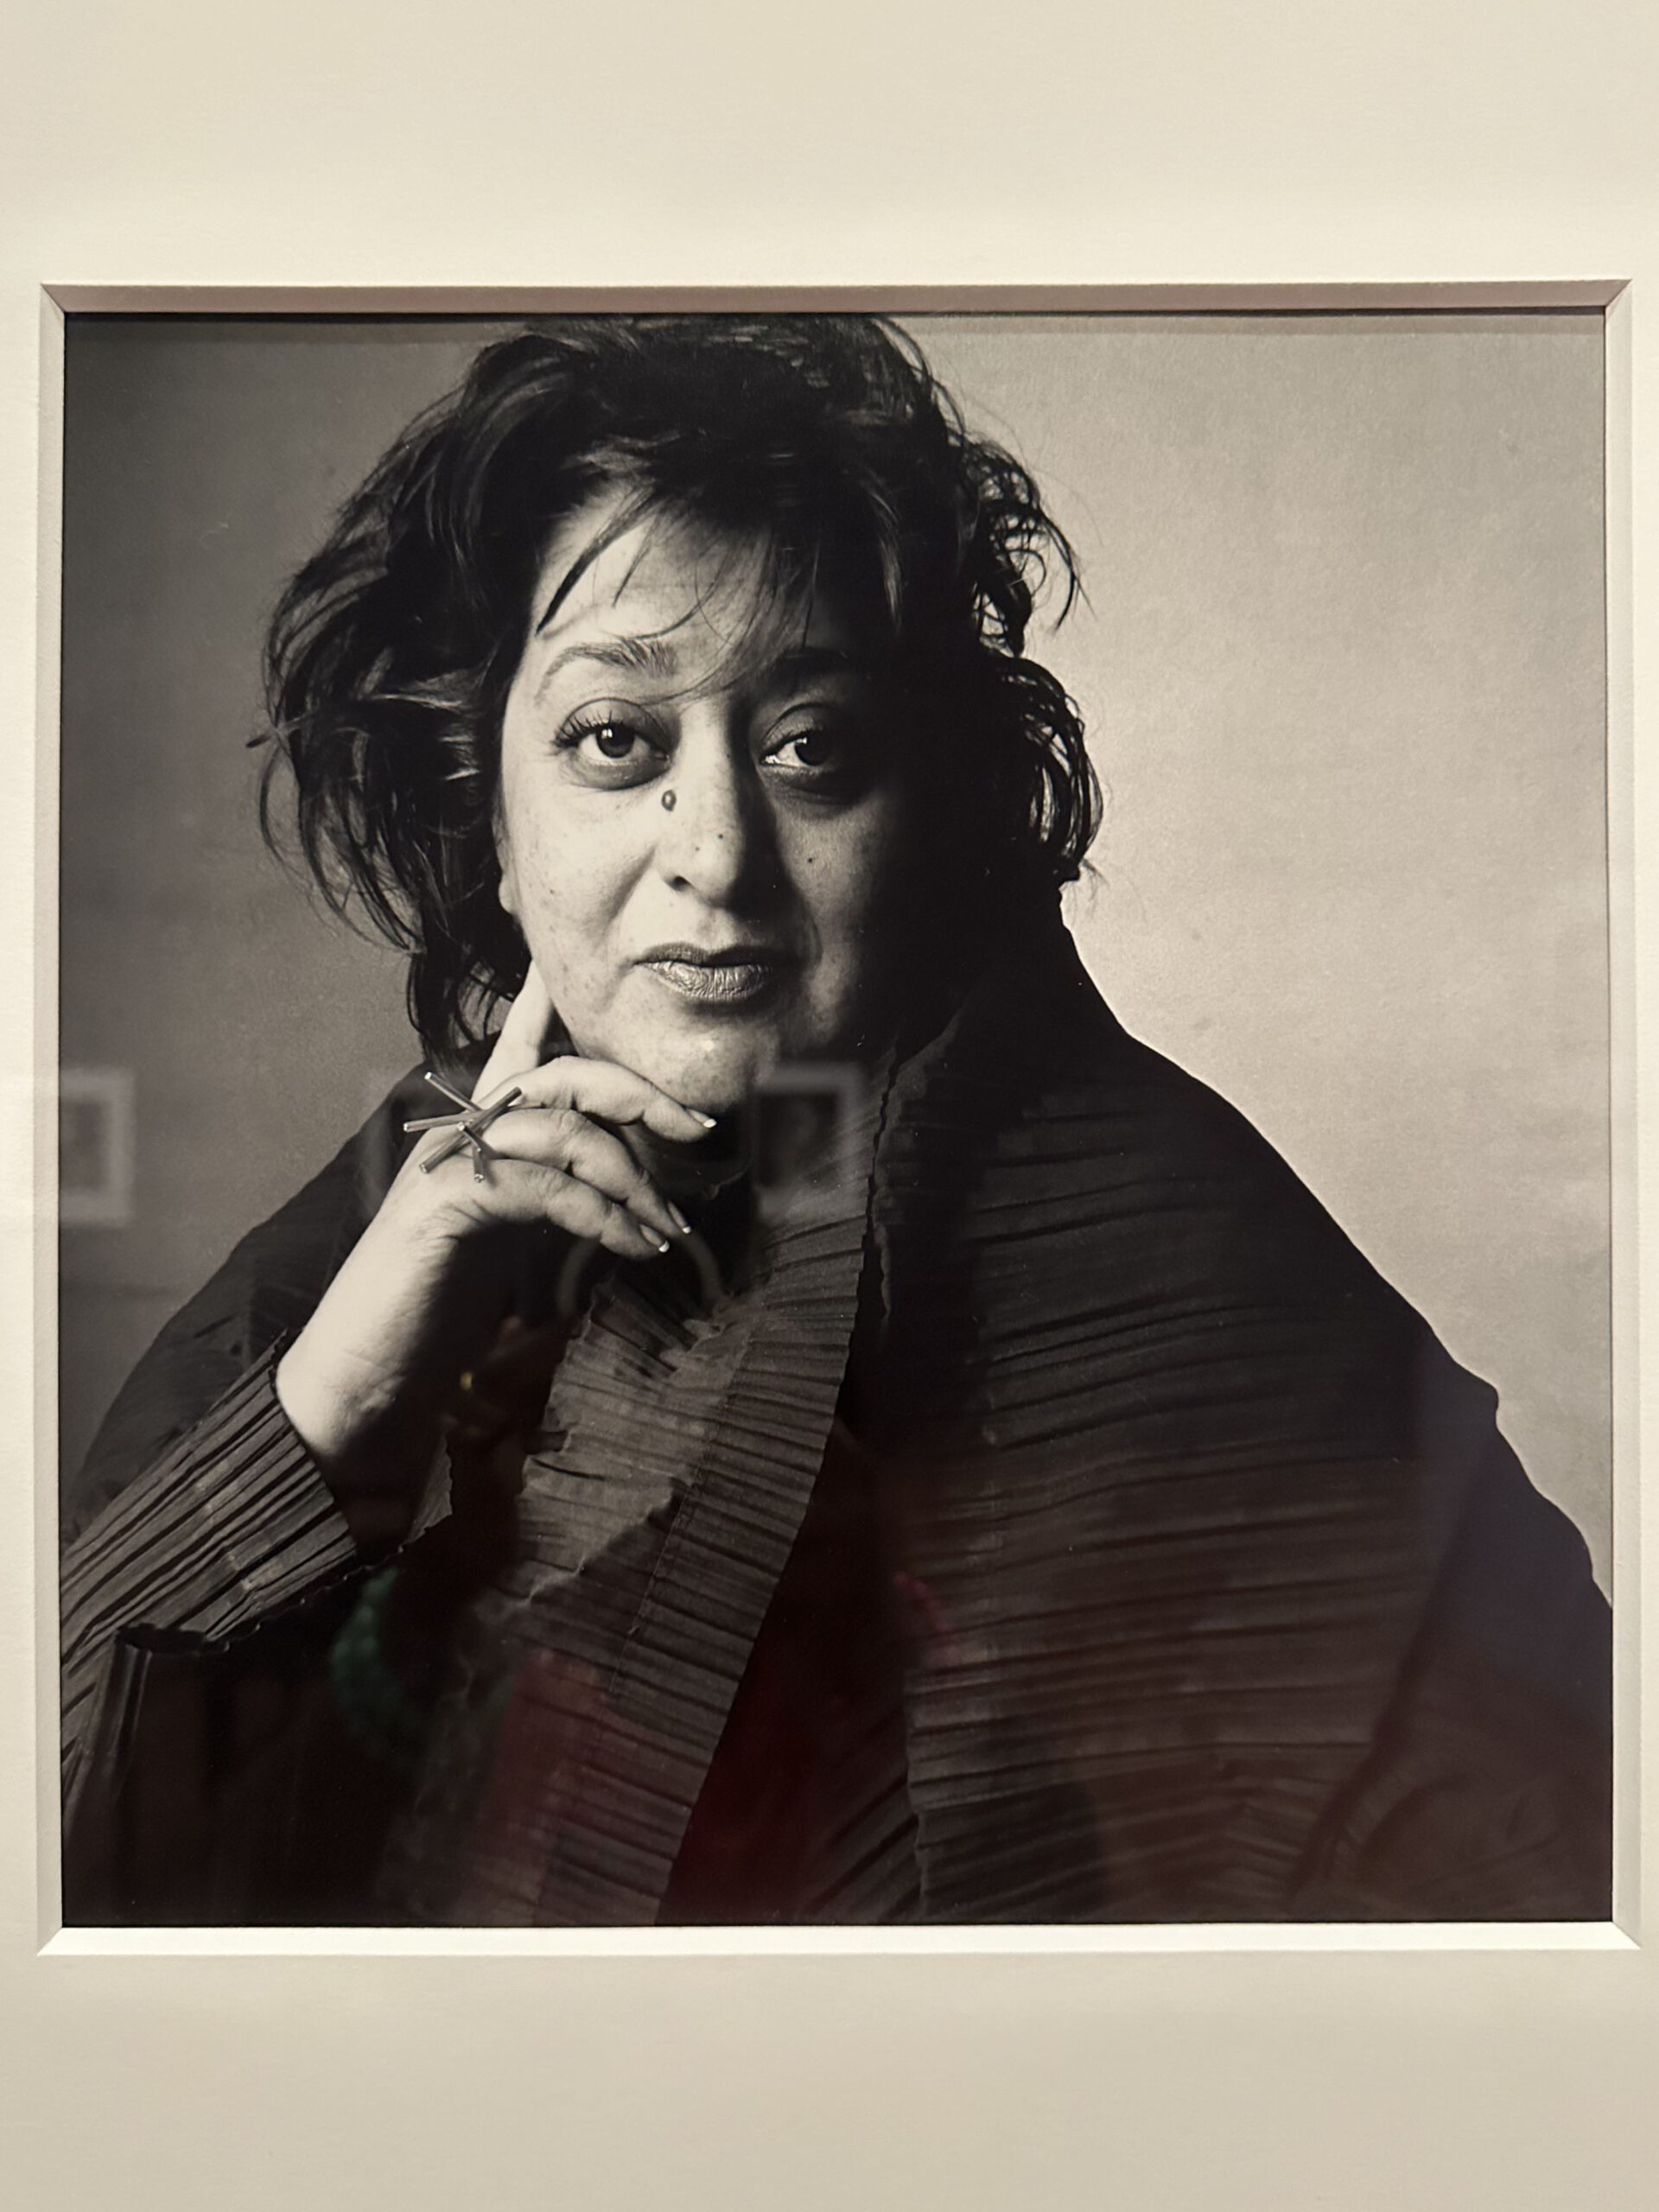 Zaha hadid by irving penn, photography exhibited at de young museum © irving penn